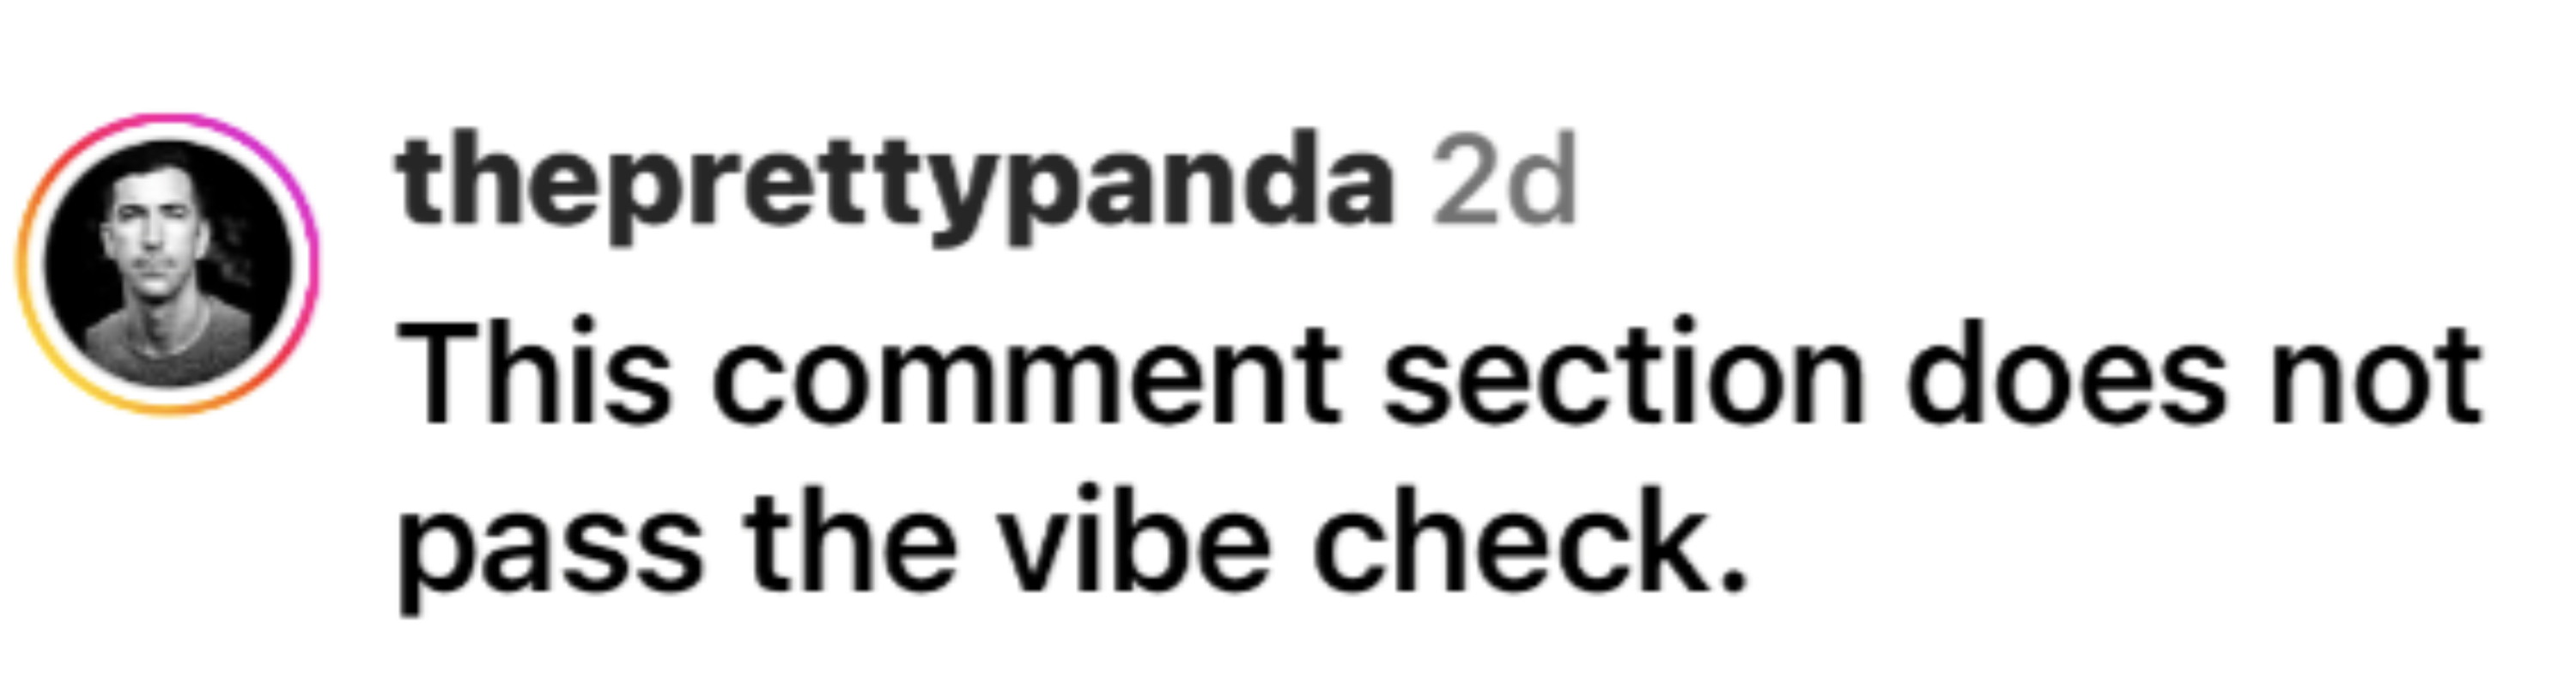 &quot;This comment section does not pass the vibe check.&quot;